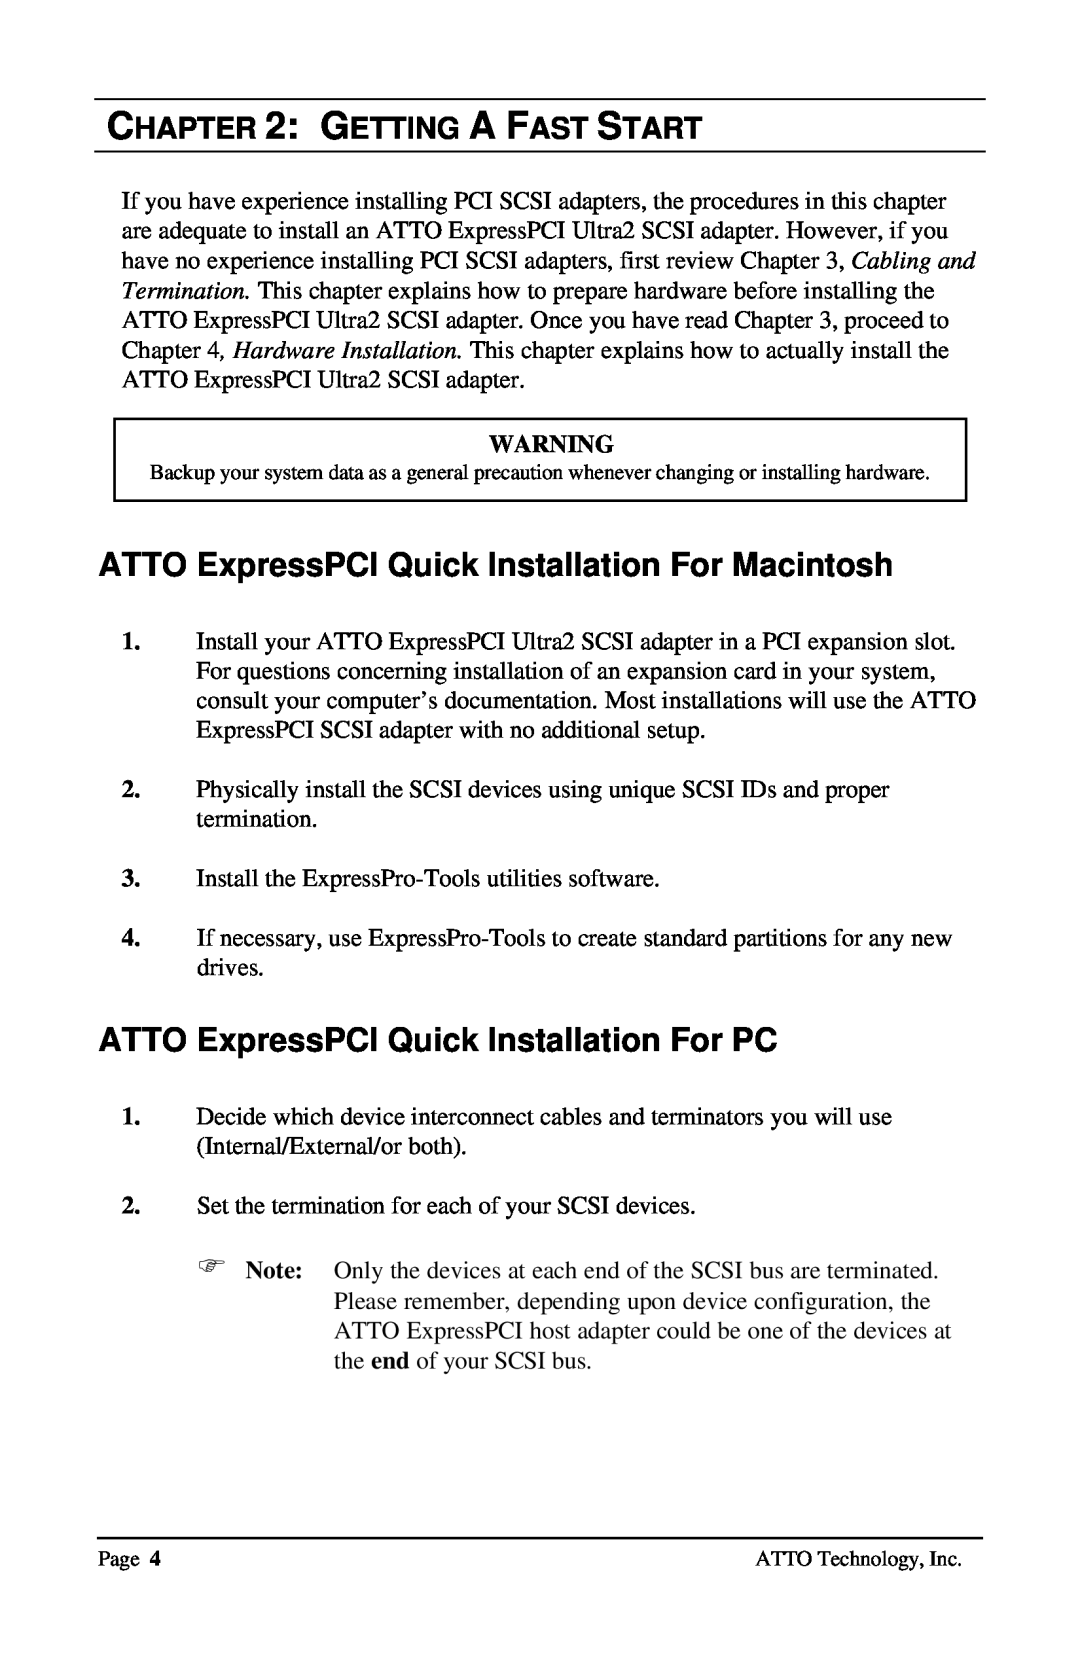 ATTO Technology UL2D, UL25 ATTO ExpressPCI Quick Installation For Macintosh, ATTO ExpressPCI Quick Installation For PC 